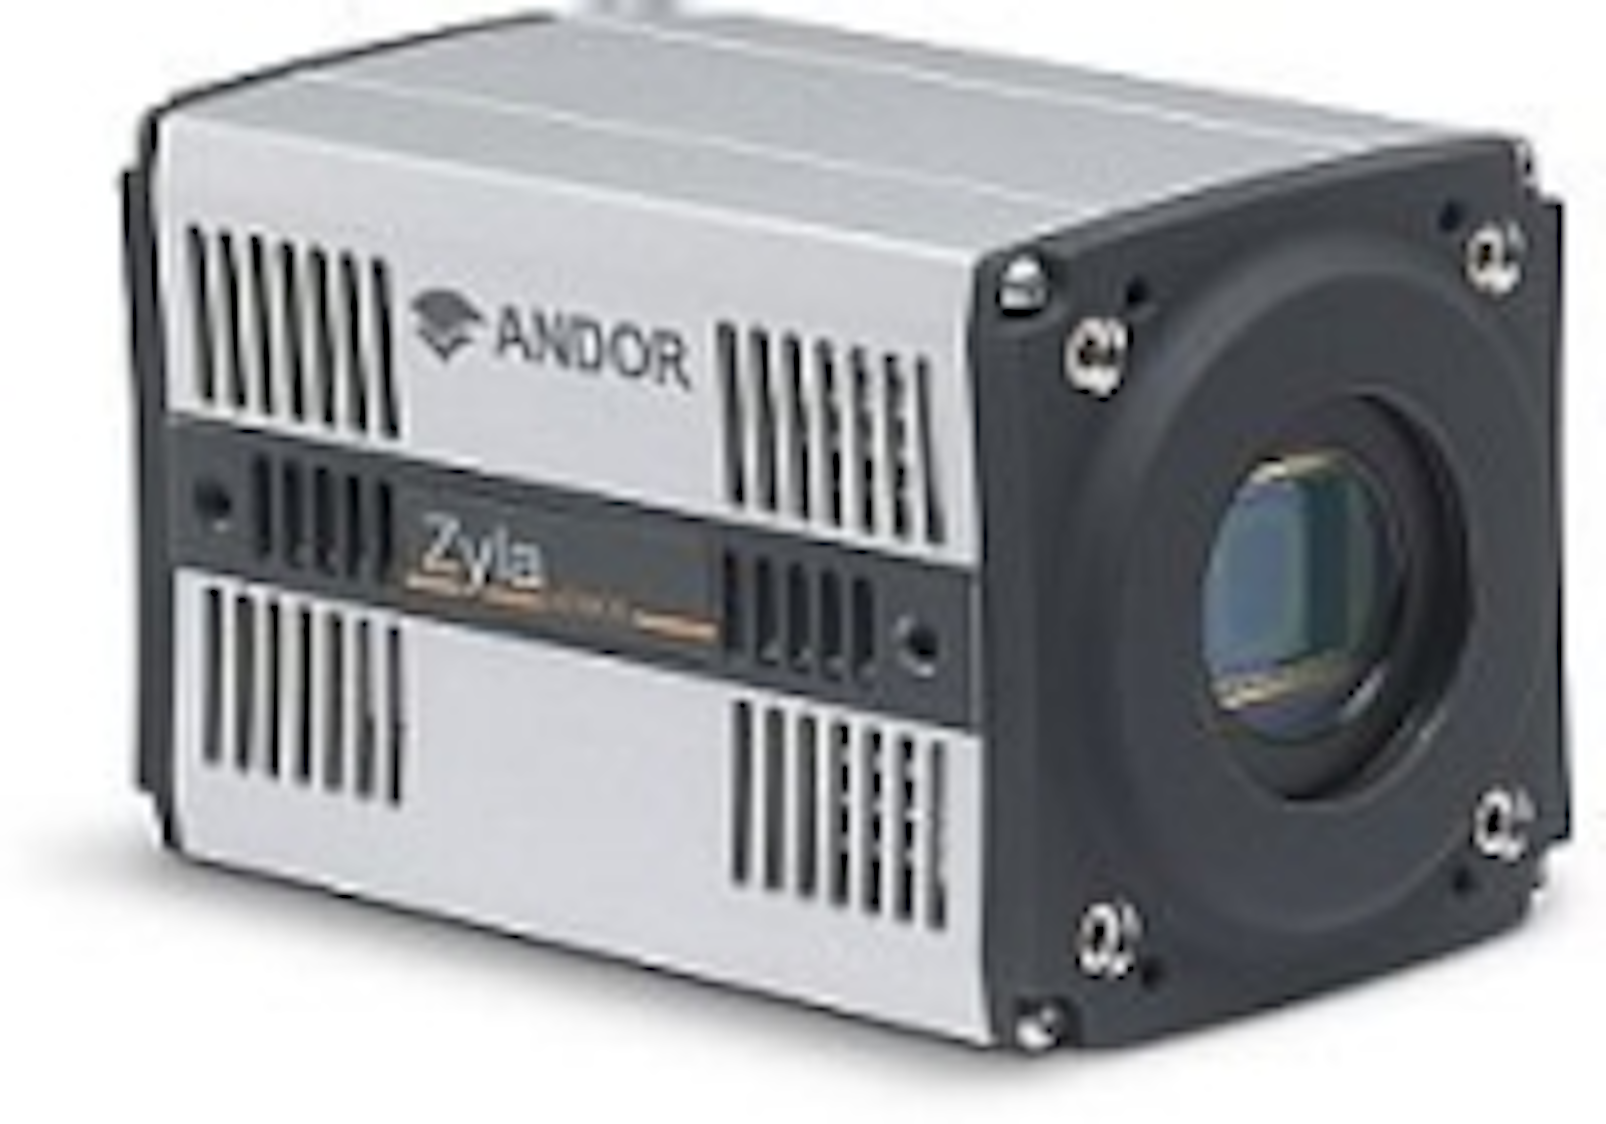 Scientific CMOS camera from Andor targets microscopy applications